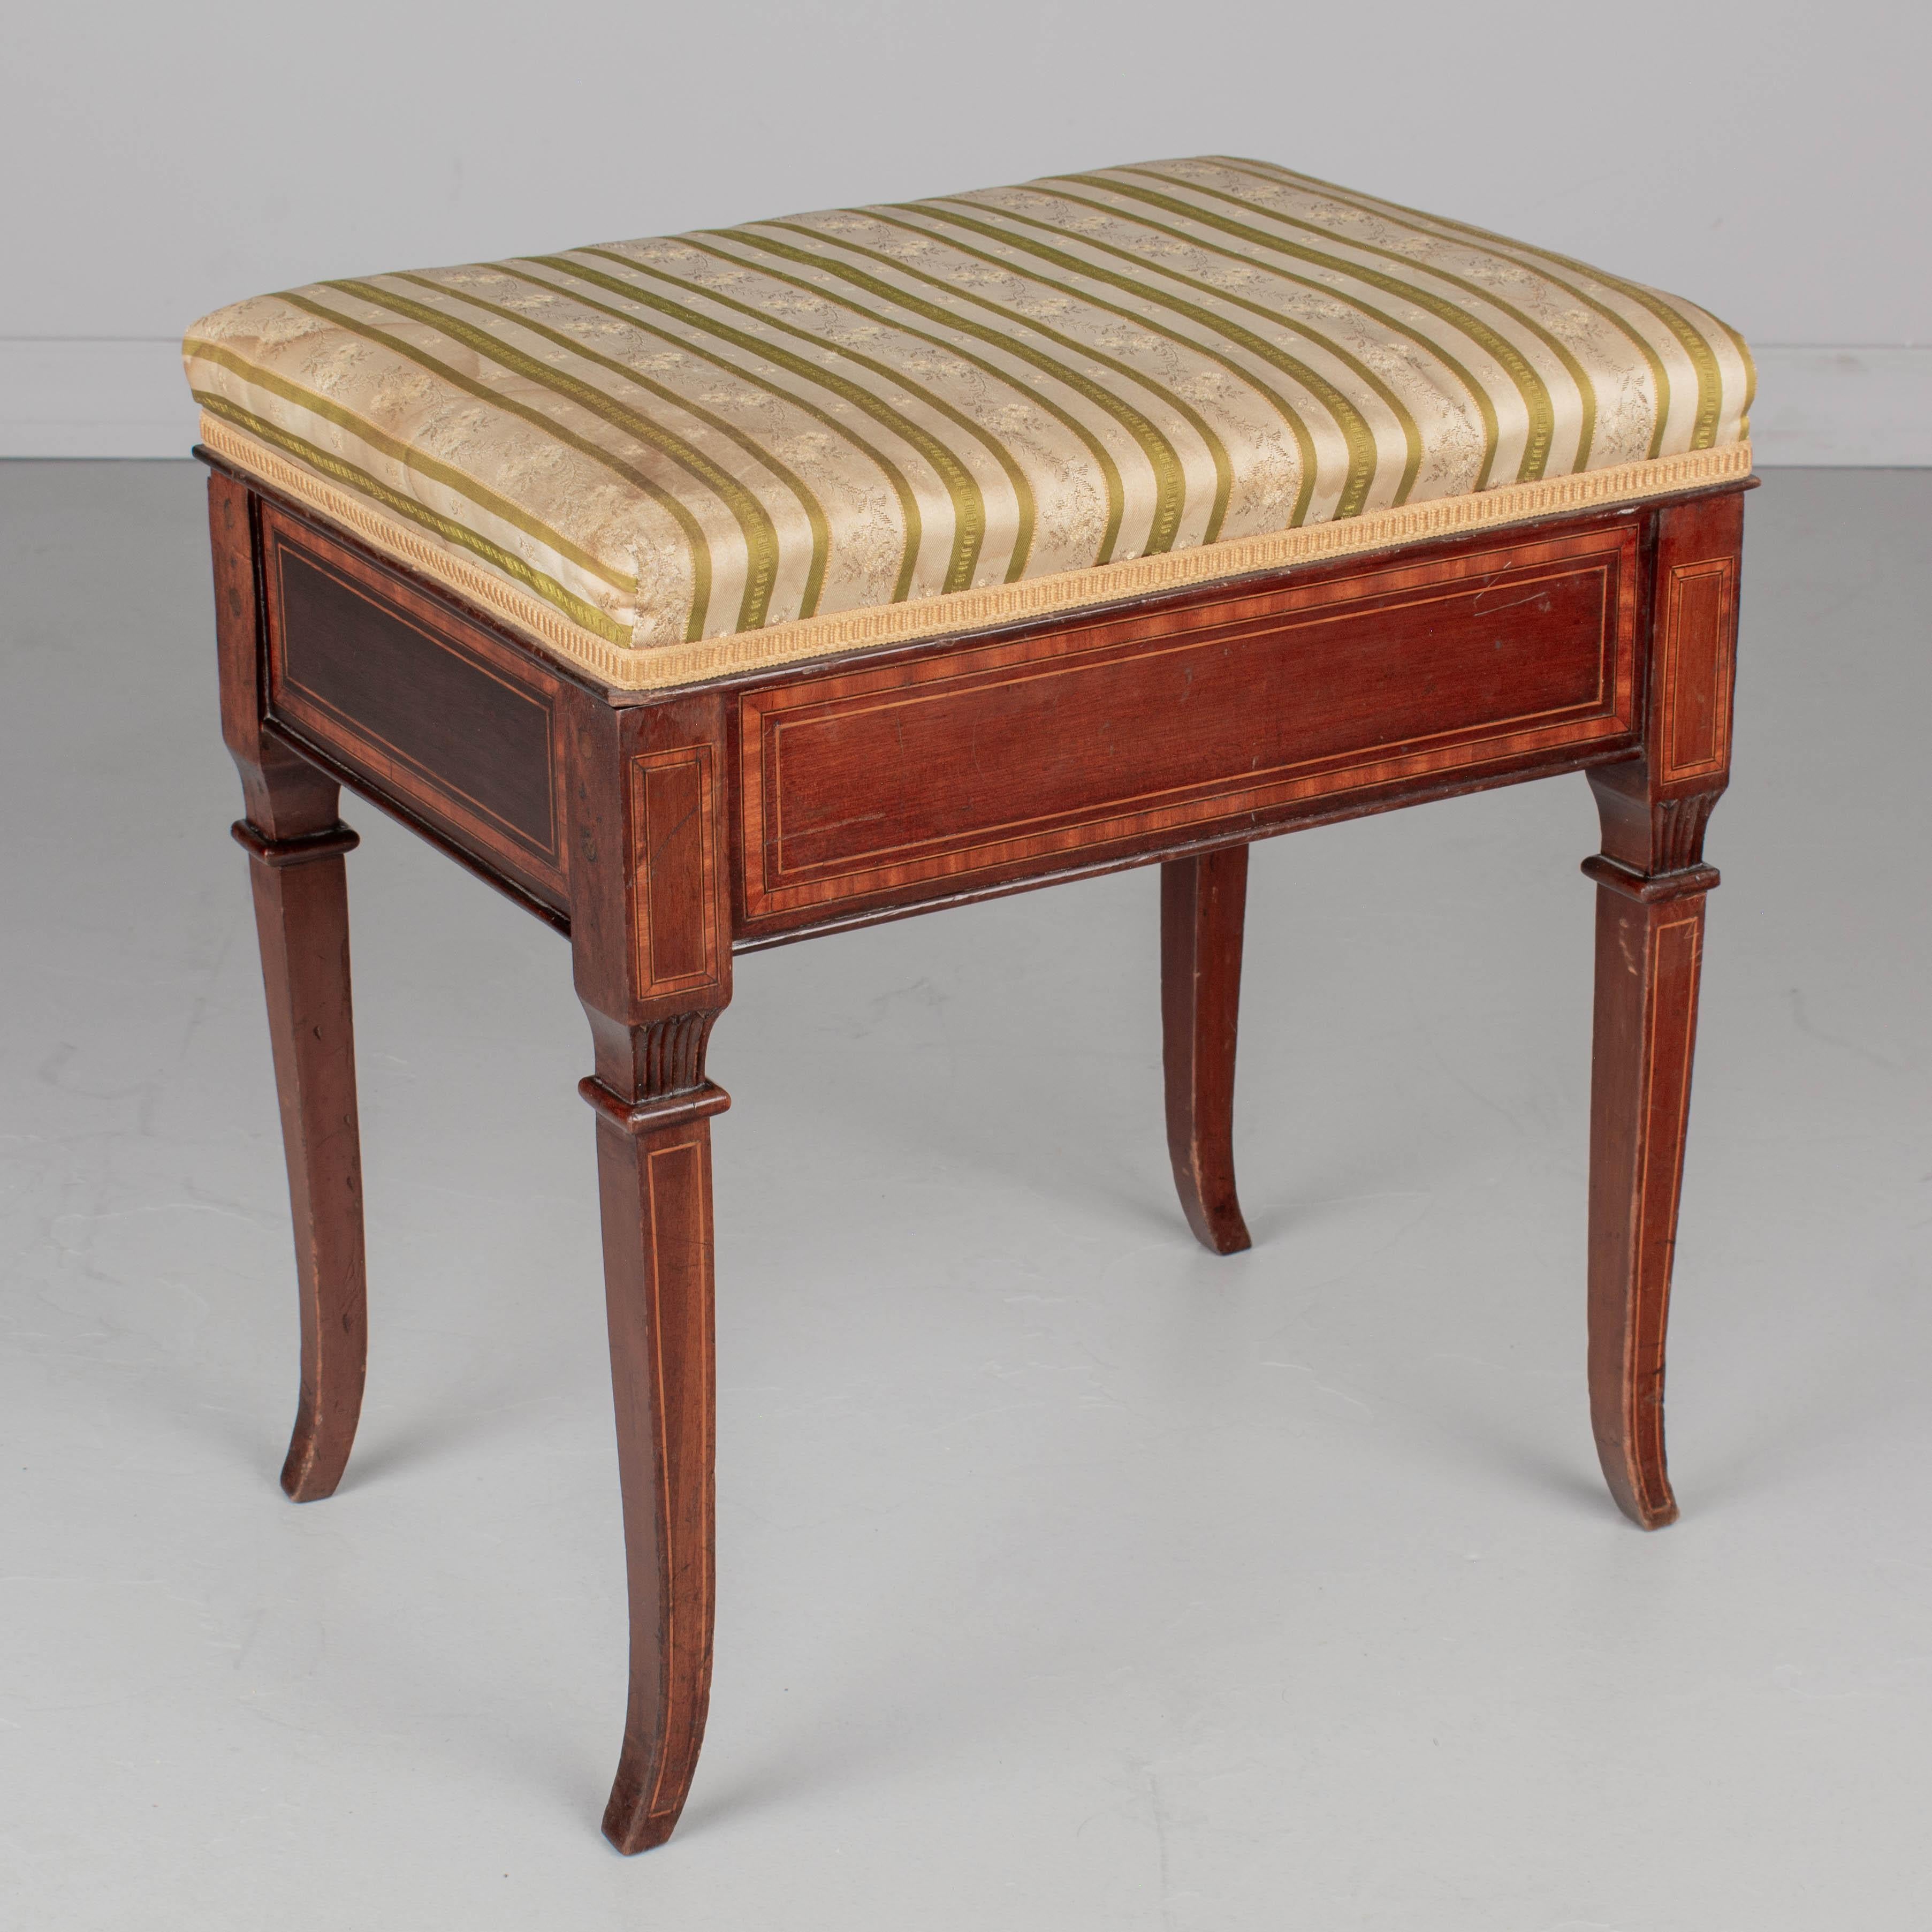 A Louis XVI style French mahogany piano bench with upholstered seat. Made of solid mahogany with marquetry inlay. Seat hinges open to reveal storage for sheet music. Original silk fabric is lightly soiled. Circa 1950s. 
18.5